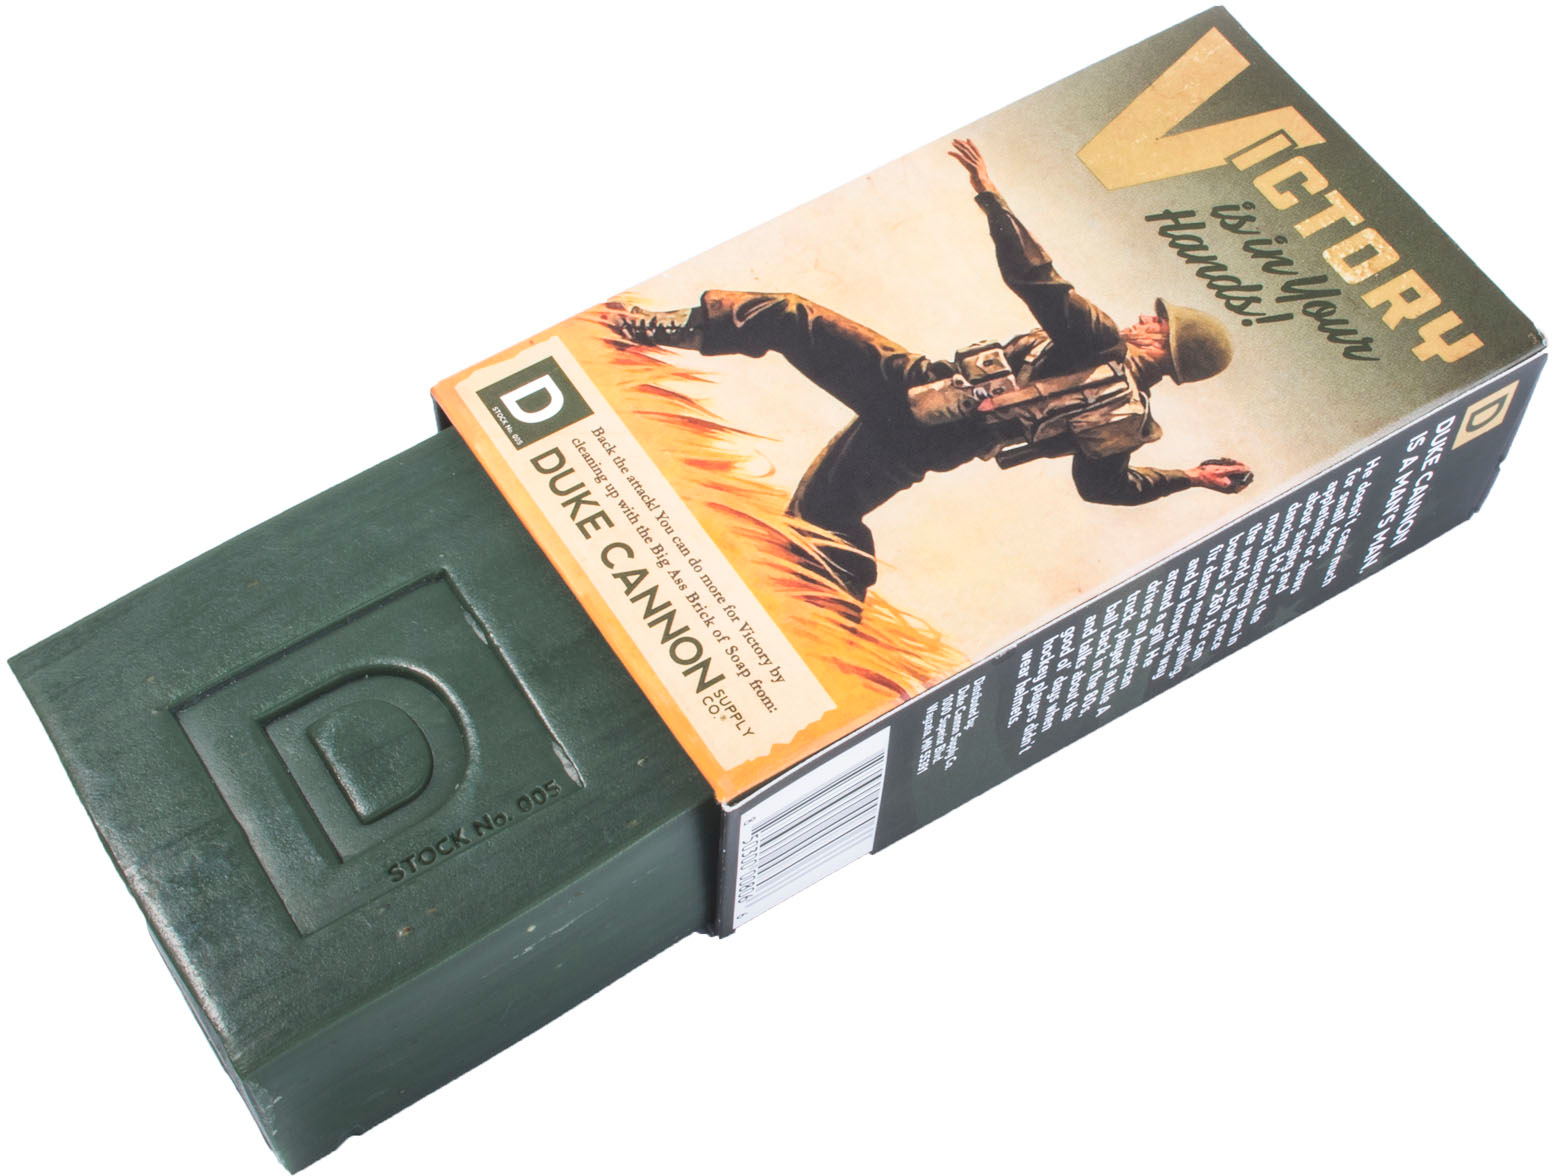 Duke Cannon Big Ass Brick of Soap Smells Like Victory Green 03GREEN1 - Best  Buy